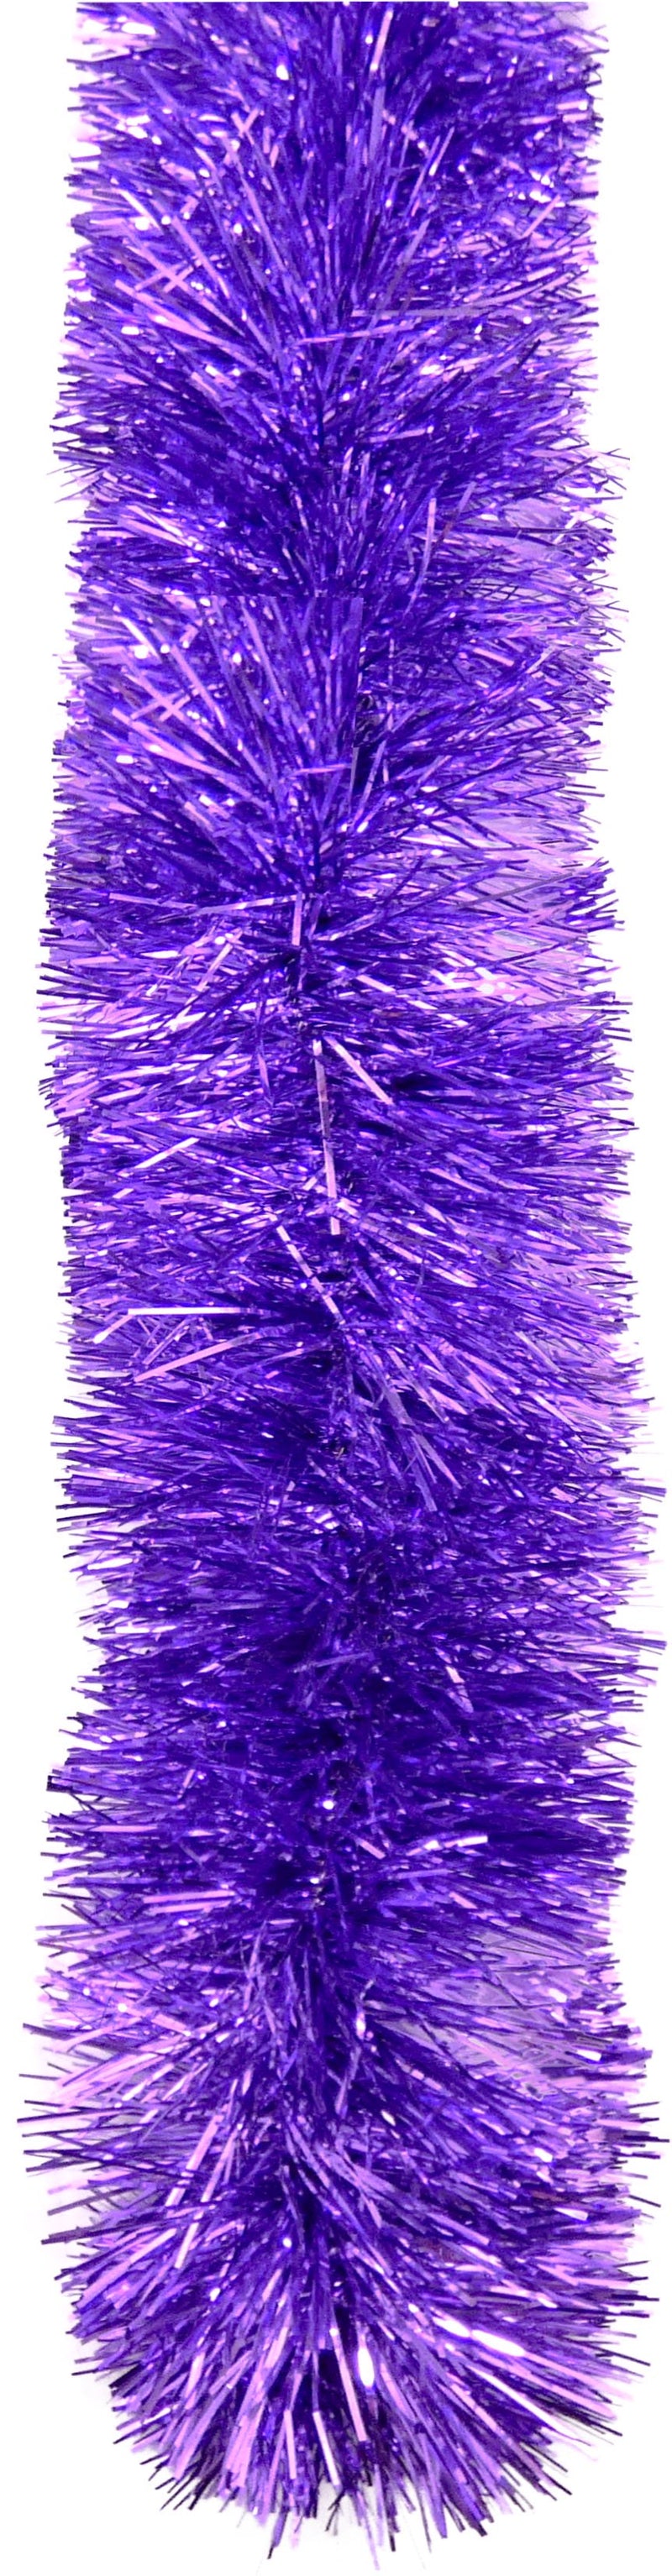 Festive, Holiday Tinsel Garland. 25 Ft. Super Ultra Lush, Extra Thick Multi-Layer Foil Tinsel: Fetival, Christmas, Valentine'S Day, Birthday, Celebration, Party, Special Event. Color: Purple